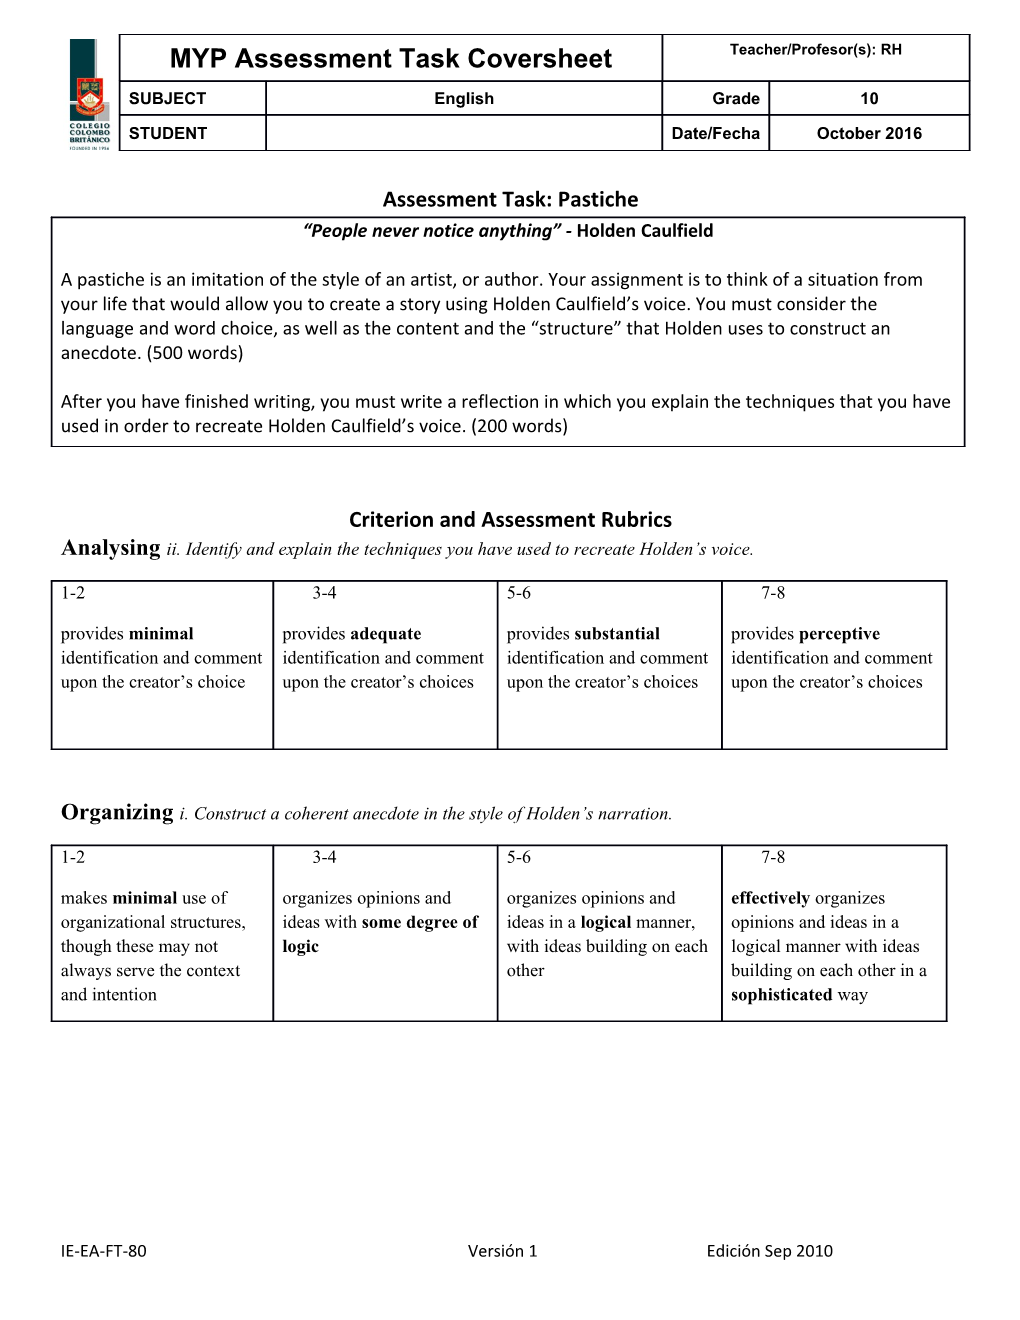 Criterion and Assessment Rubrics